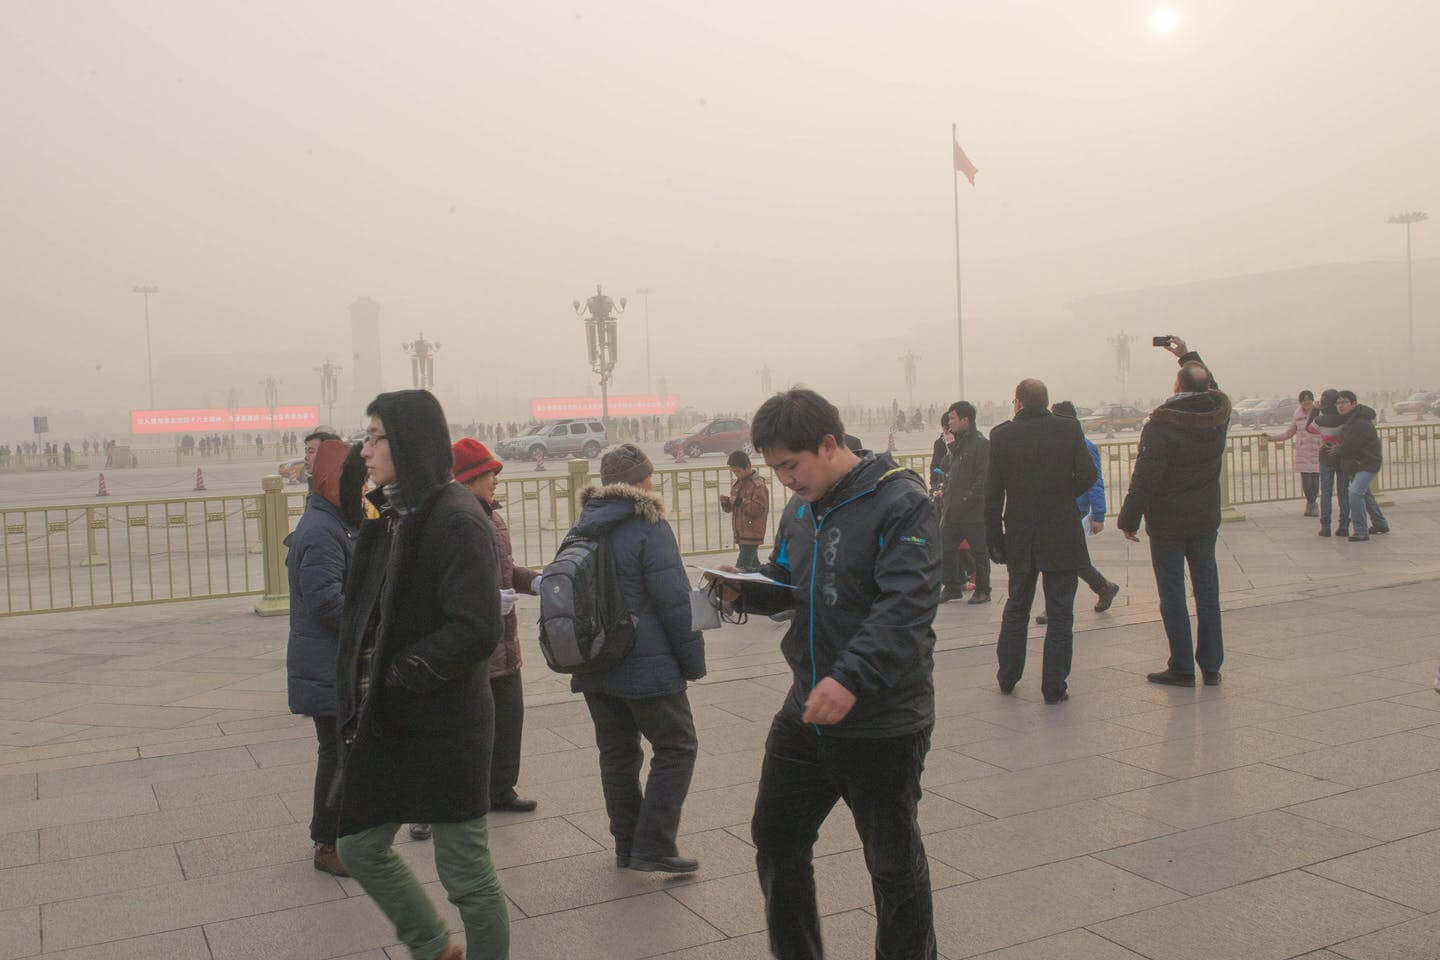 China’s Greenhouse Emissions Now Account for 27% of the World’s Total